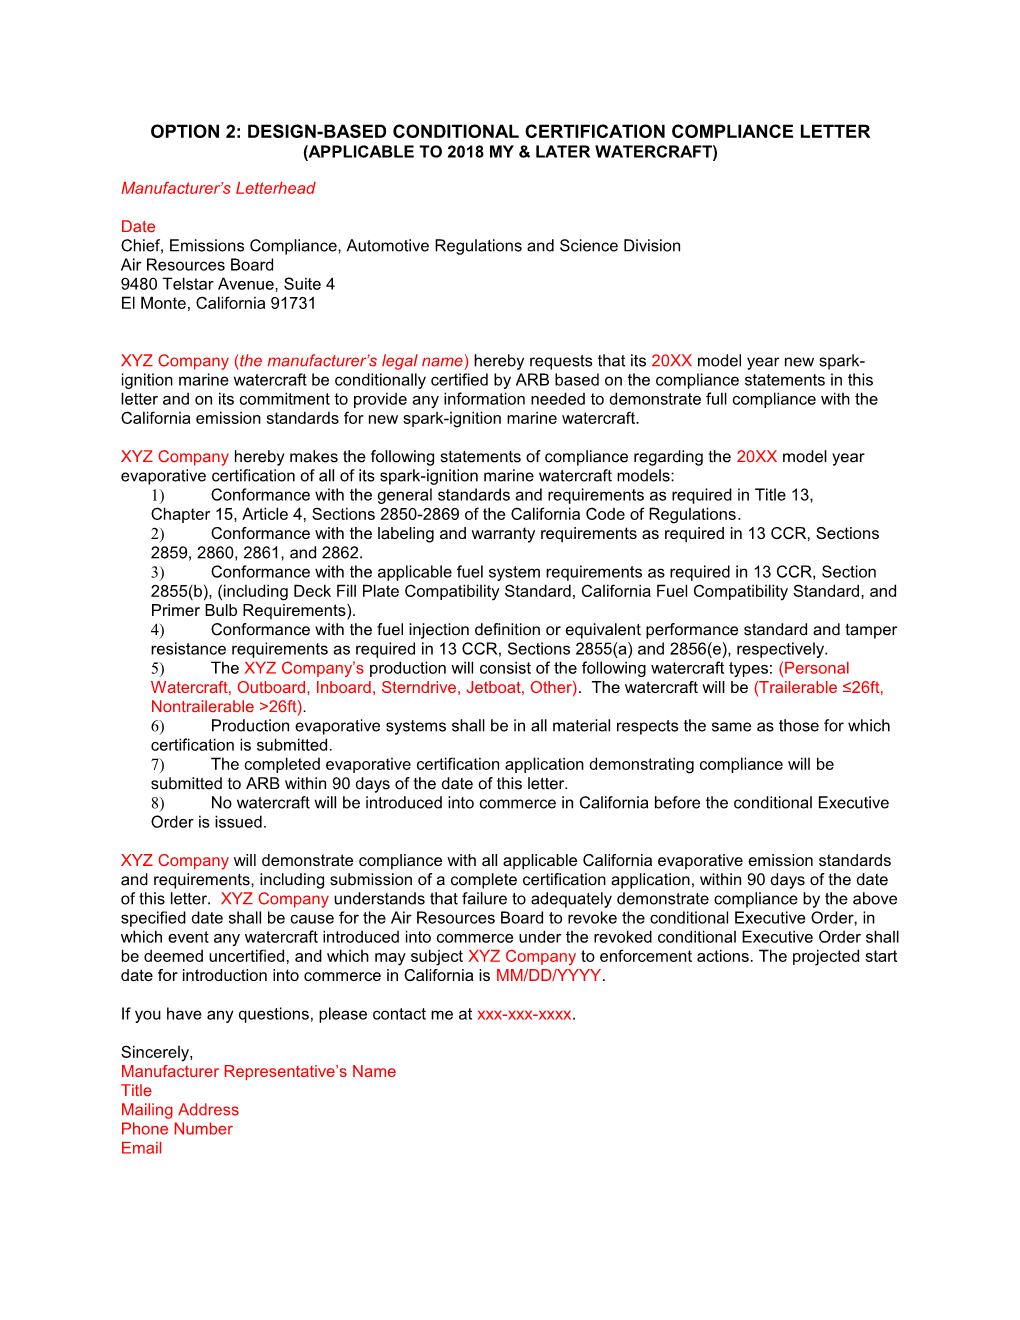 Option 2: Design-Based Conditional Certification Compliance Letter